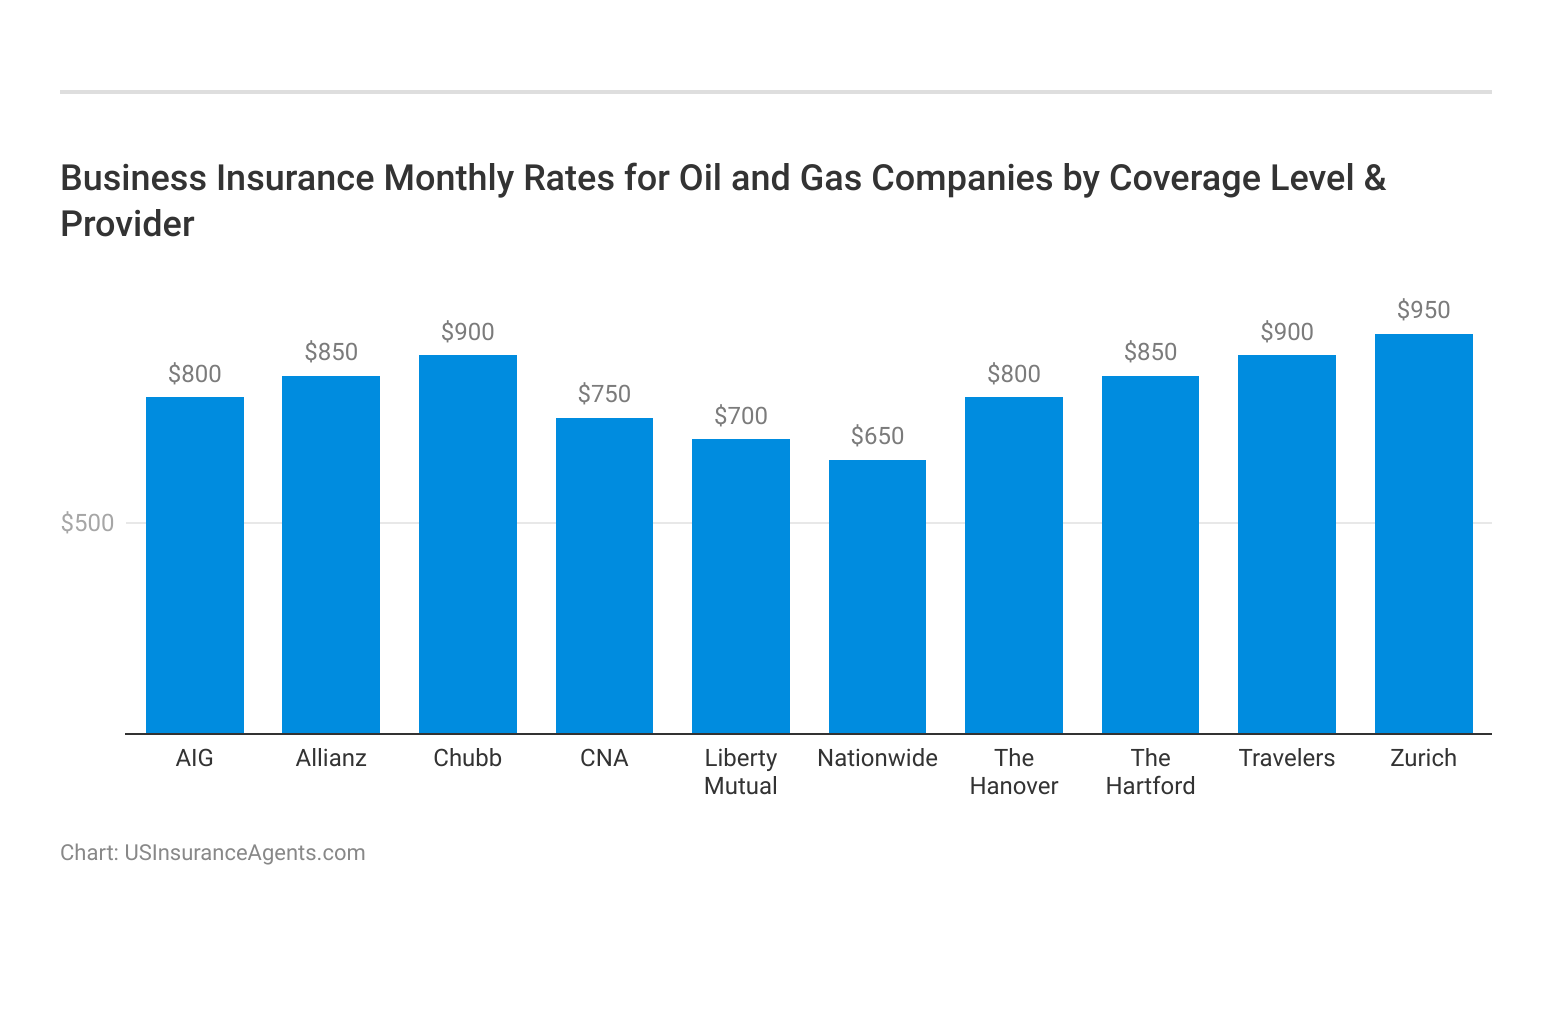 <h3>Business Insurance Monthly Rates for Oil and Gas Companies by Coverage Level & Provider</h3>